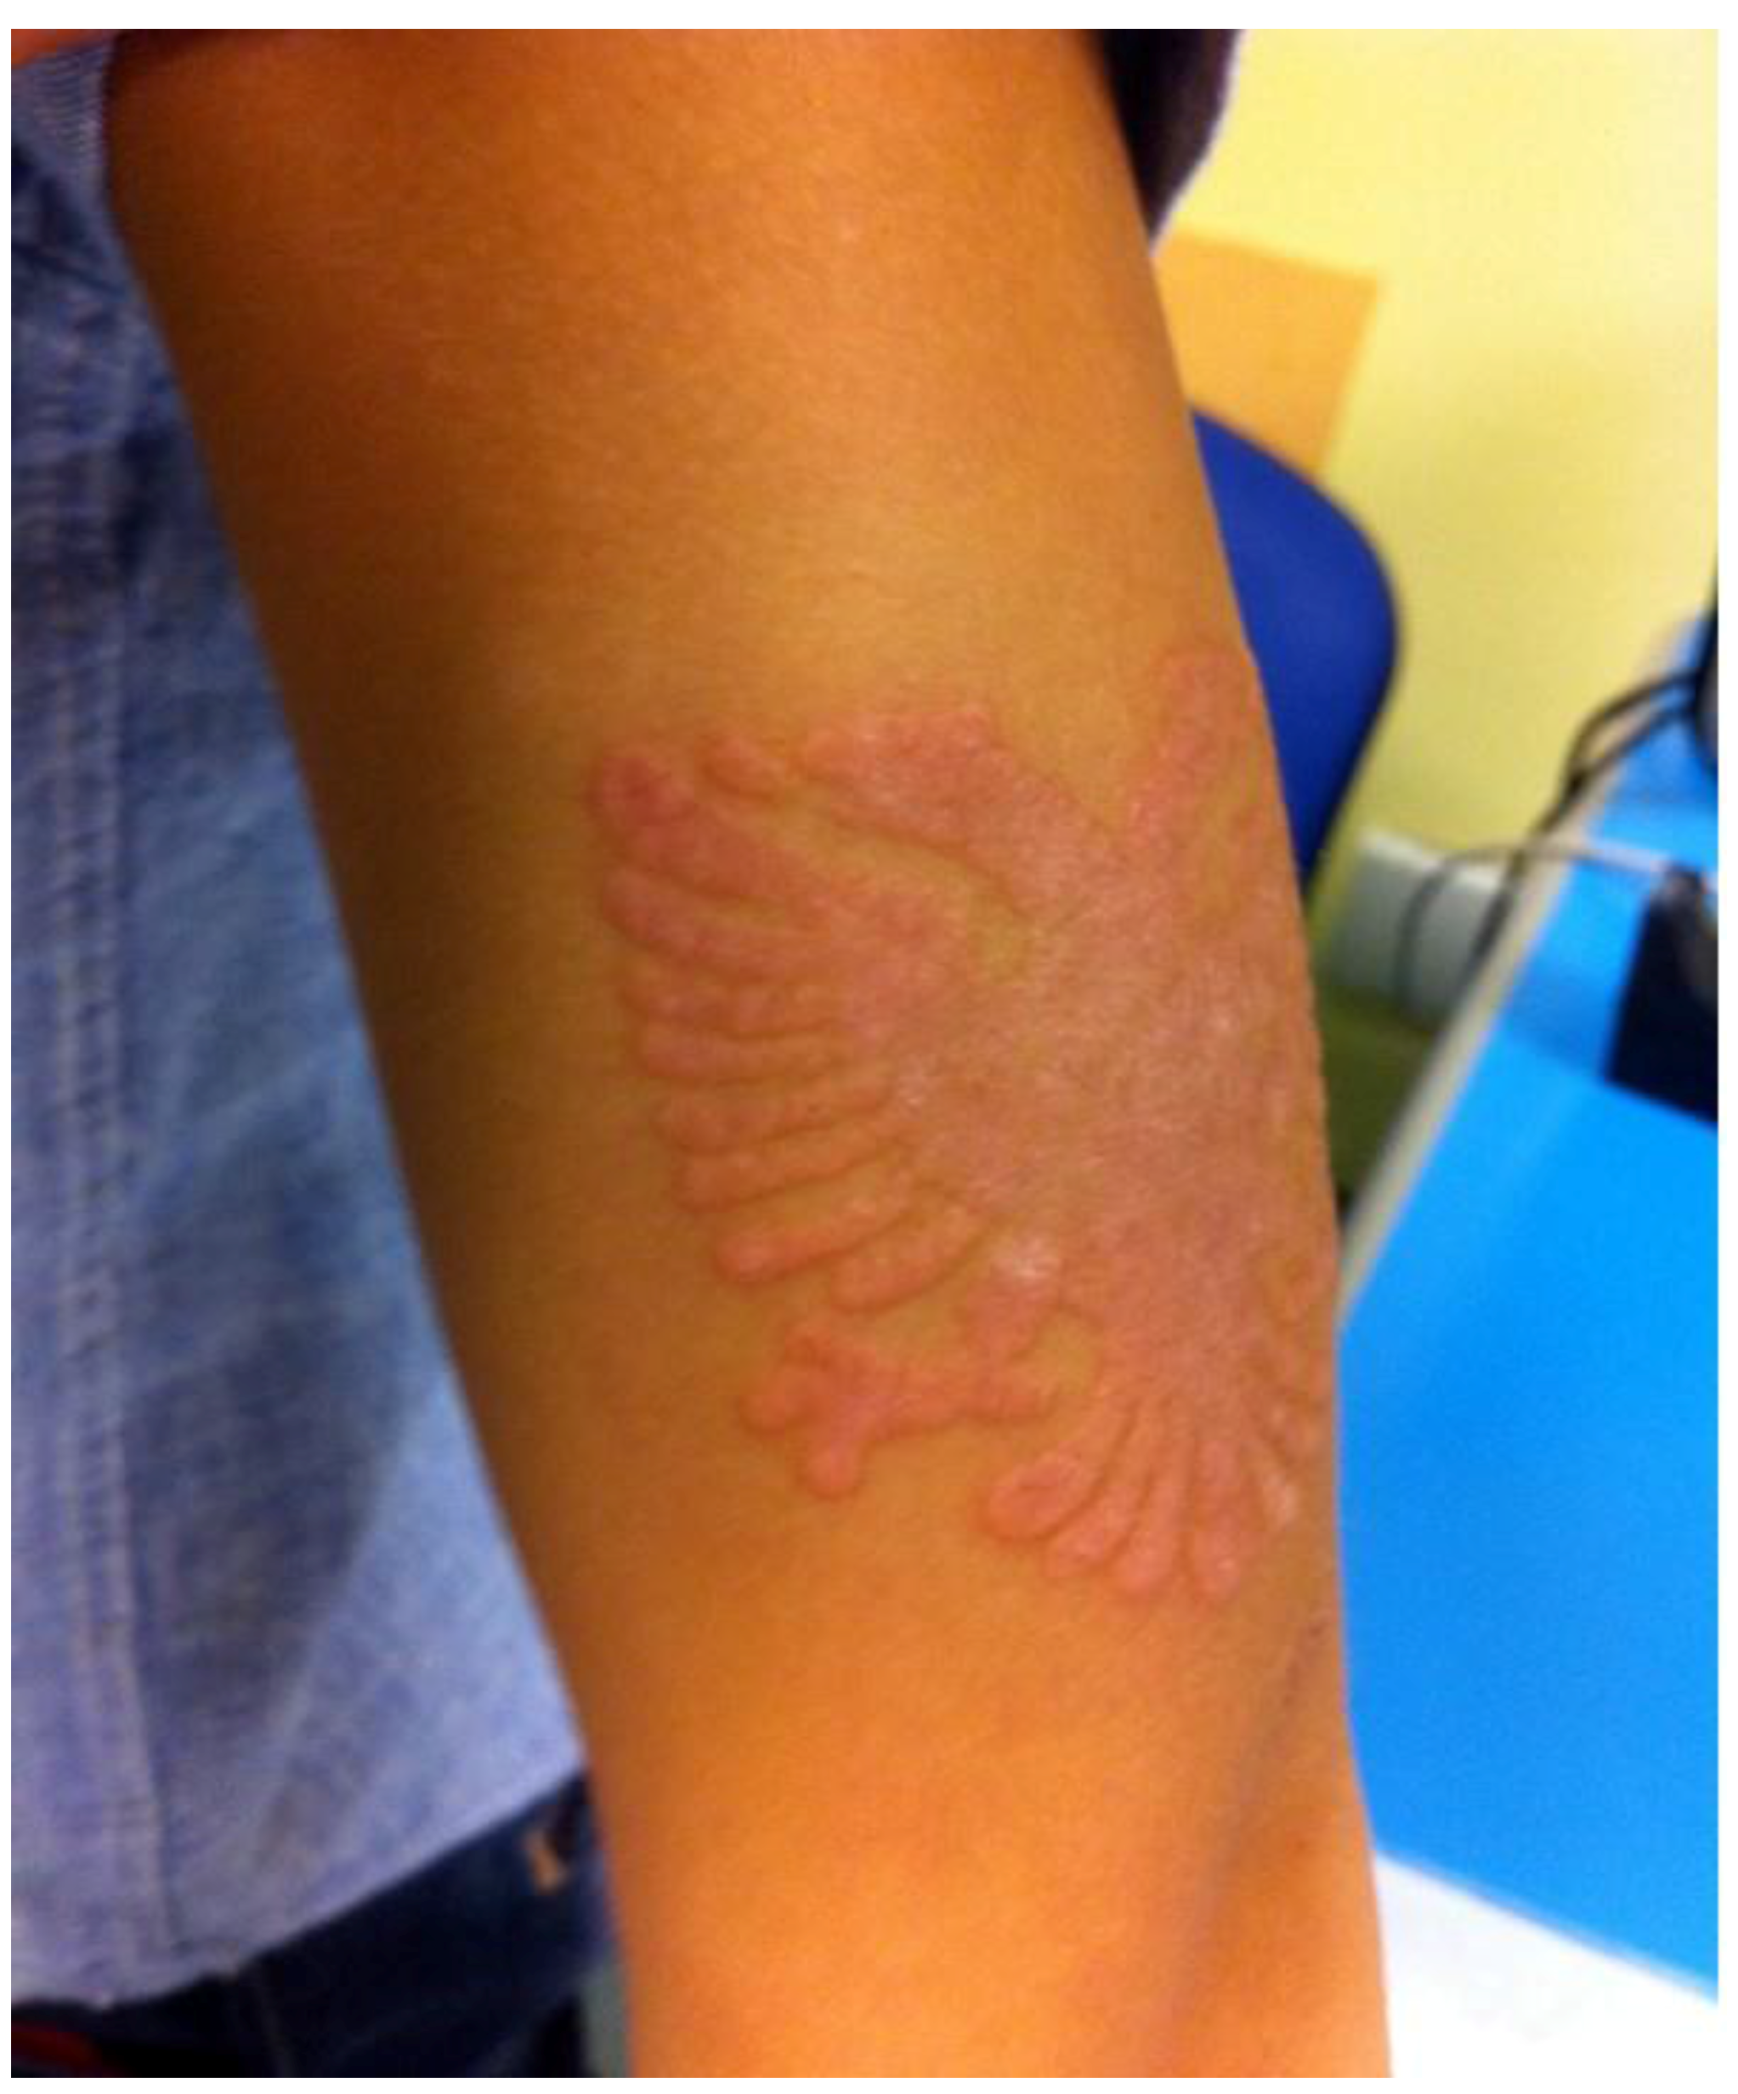 IJERPH | Free Full-Text | Temporary Black Henna Tattoos and Sensitization  to para-Phenylenediamine (PPD): Two Paediatric Case Reports and a Review of  the Literature